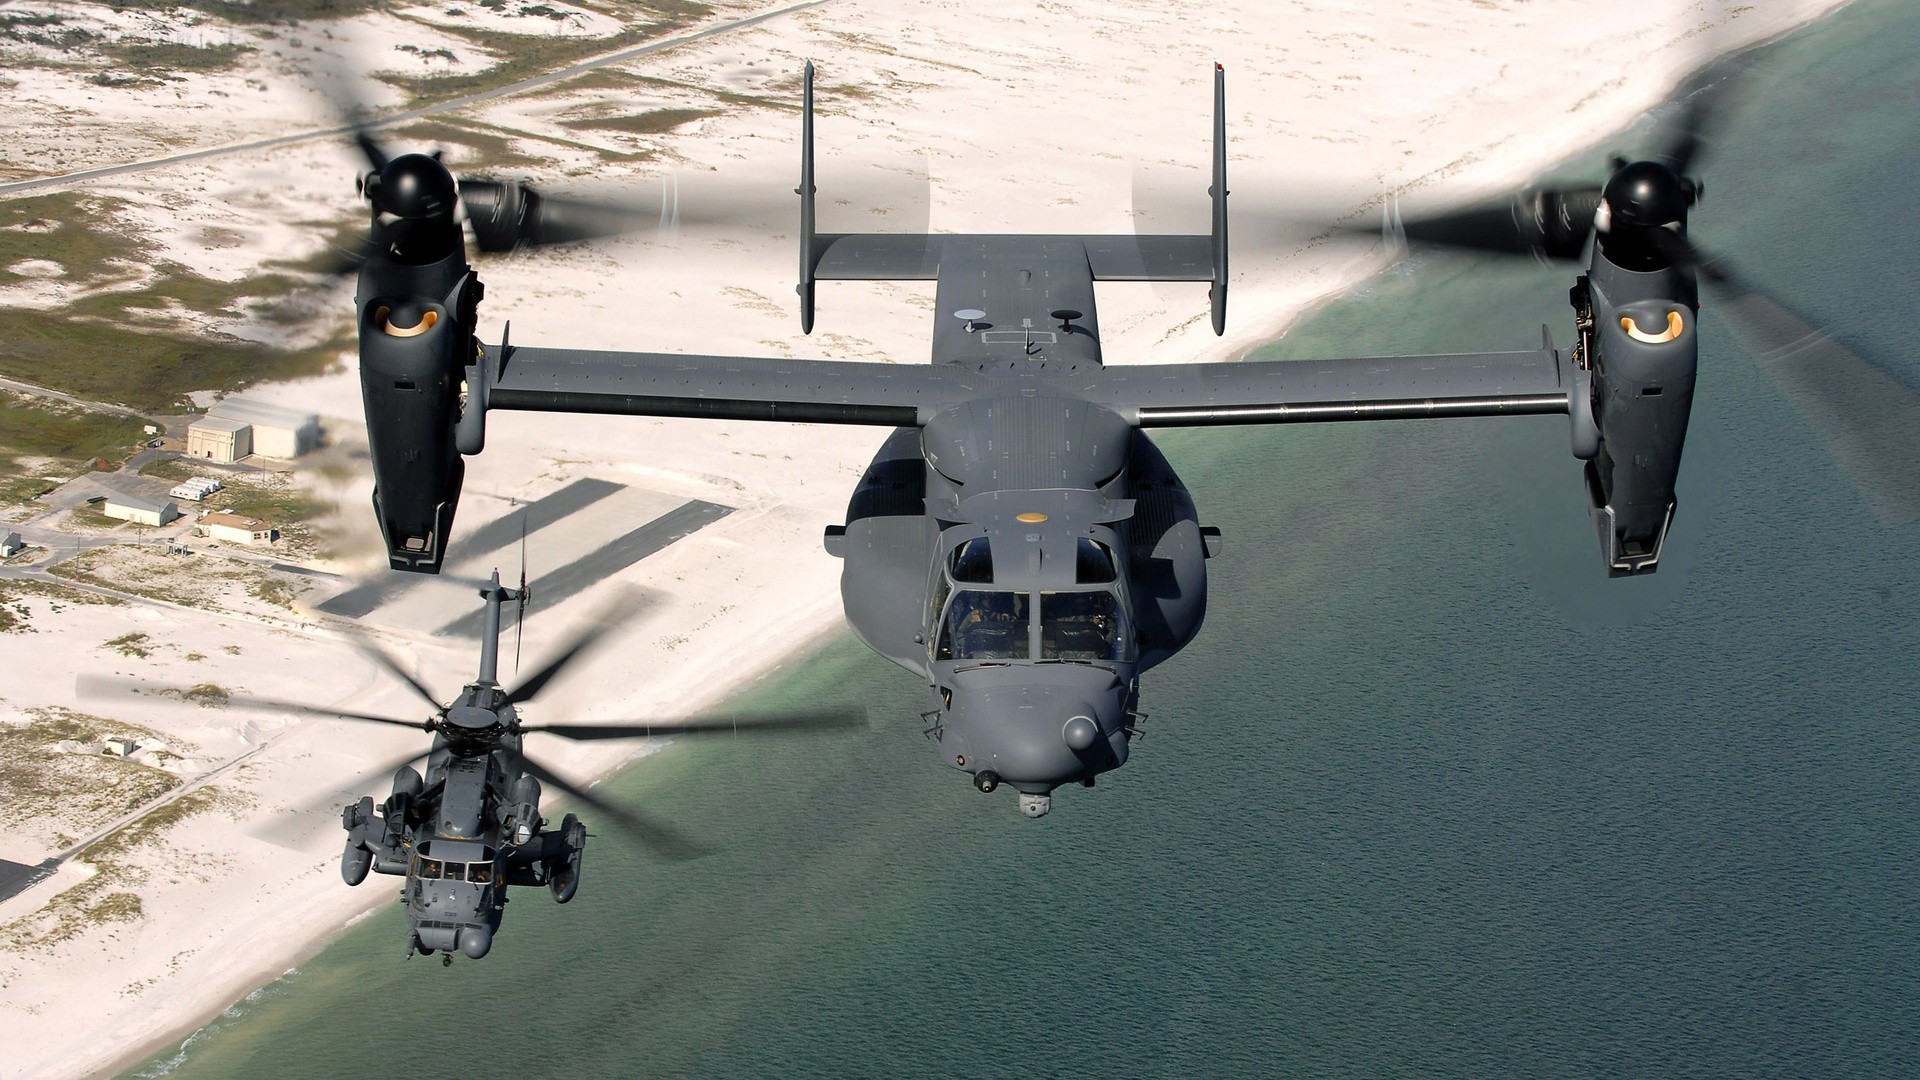 Helicopters V 22 Osprey Military MH 53 Pave Low 1920x1080